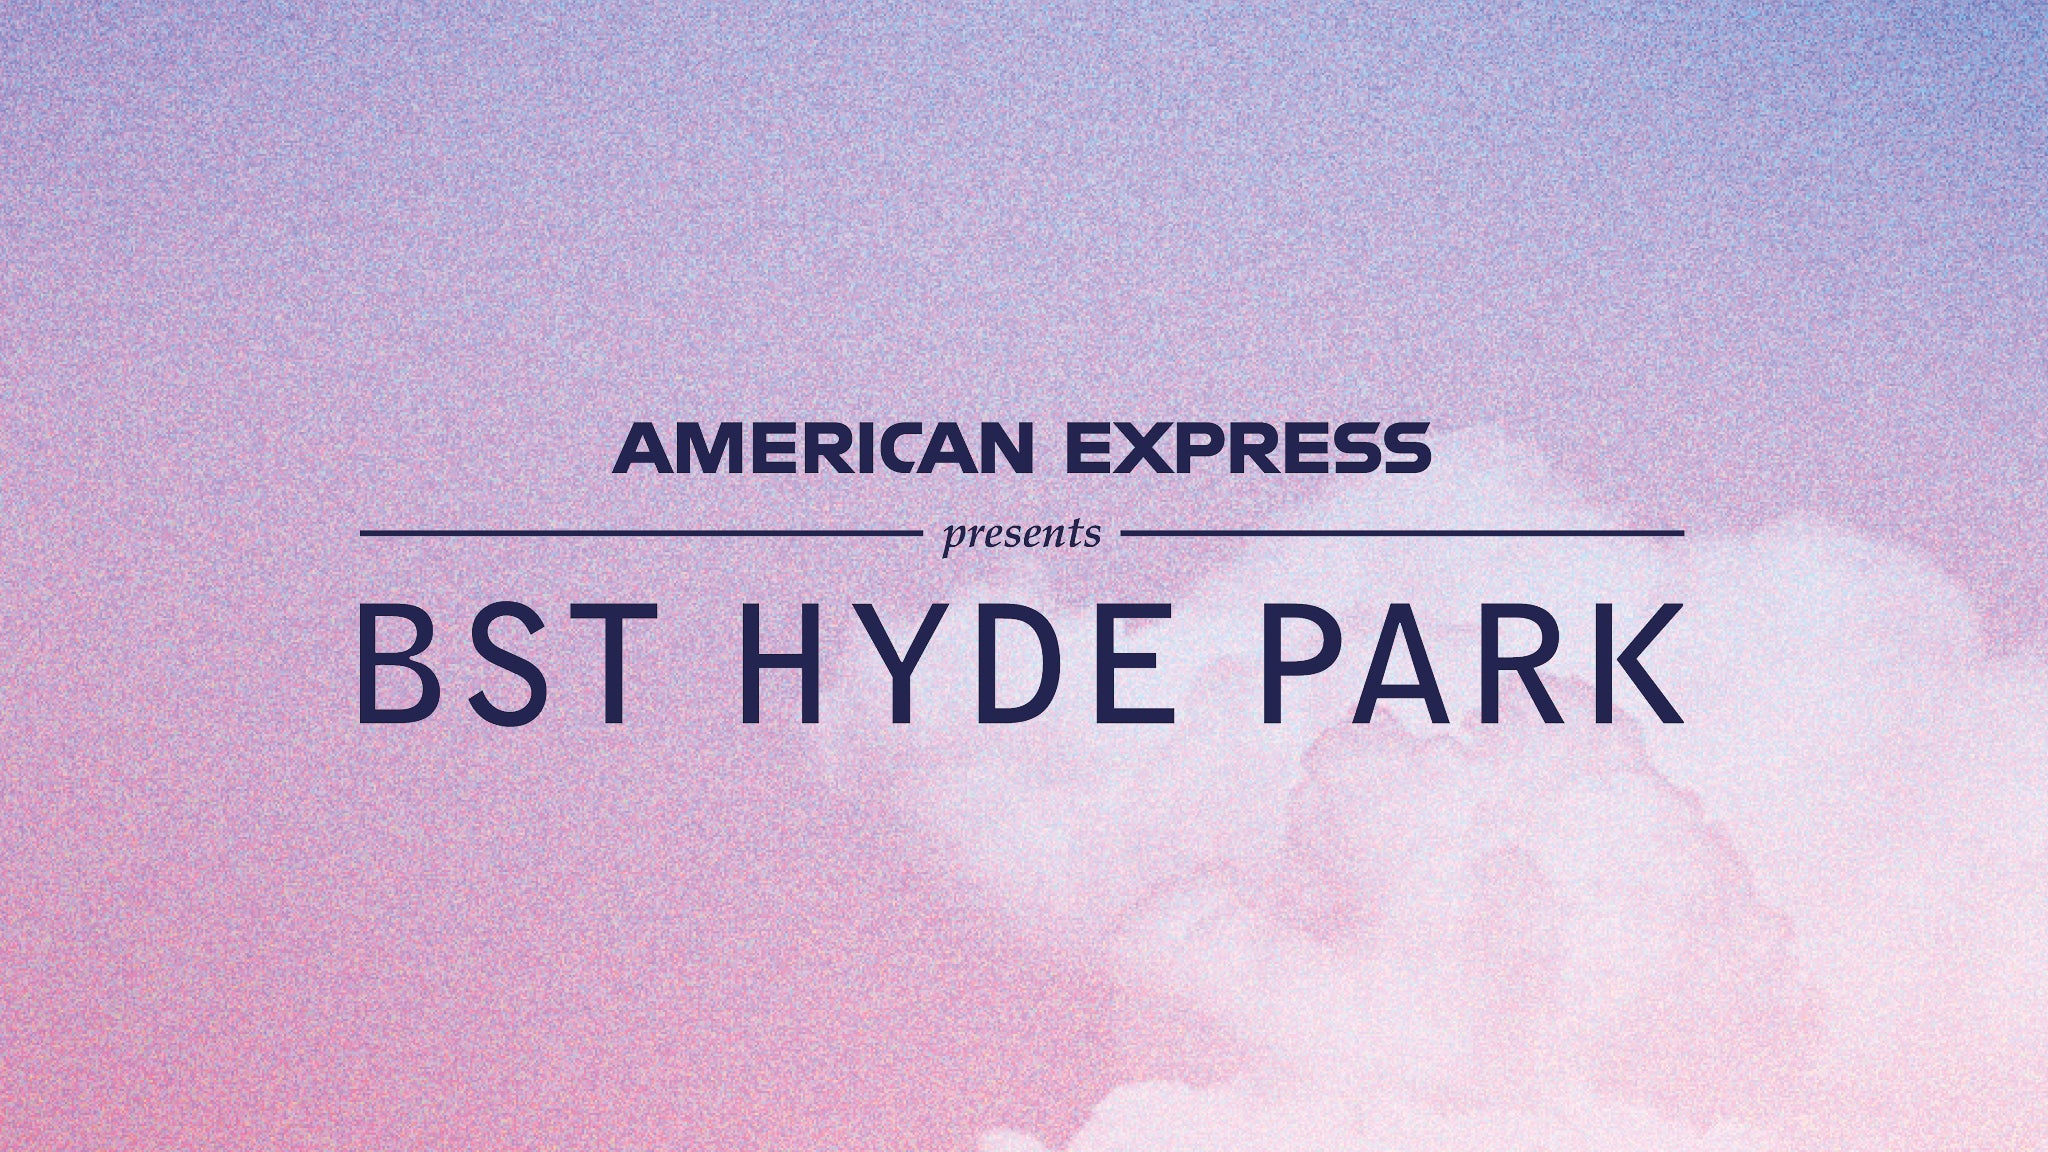 American Express Presents BST Hyde Park - All Things Orchestral